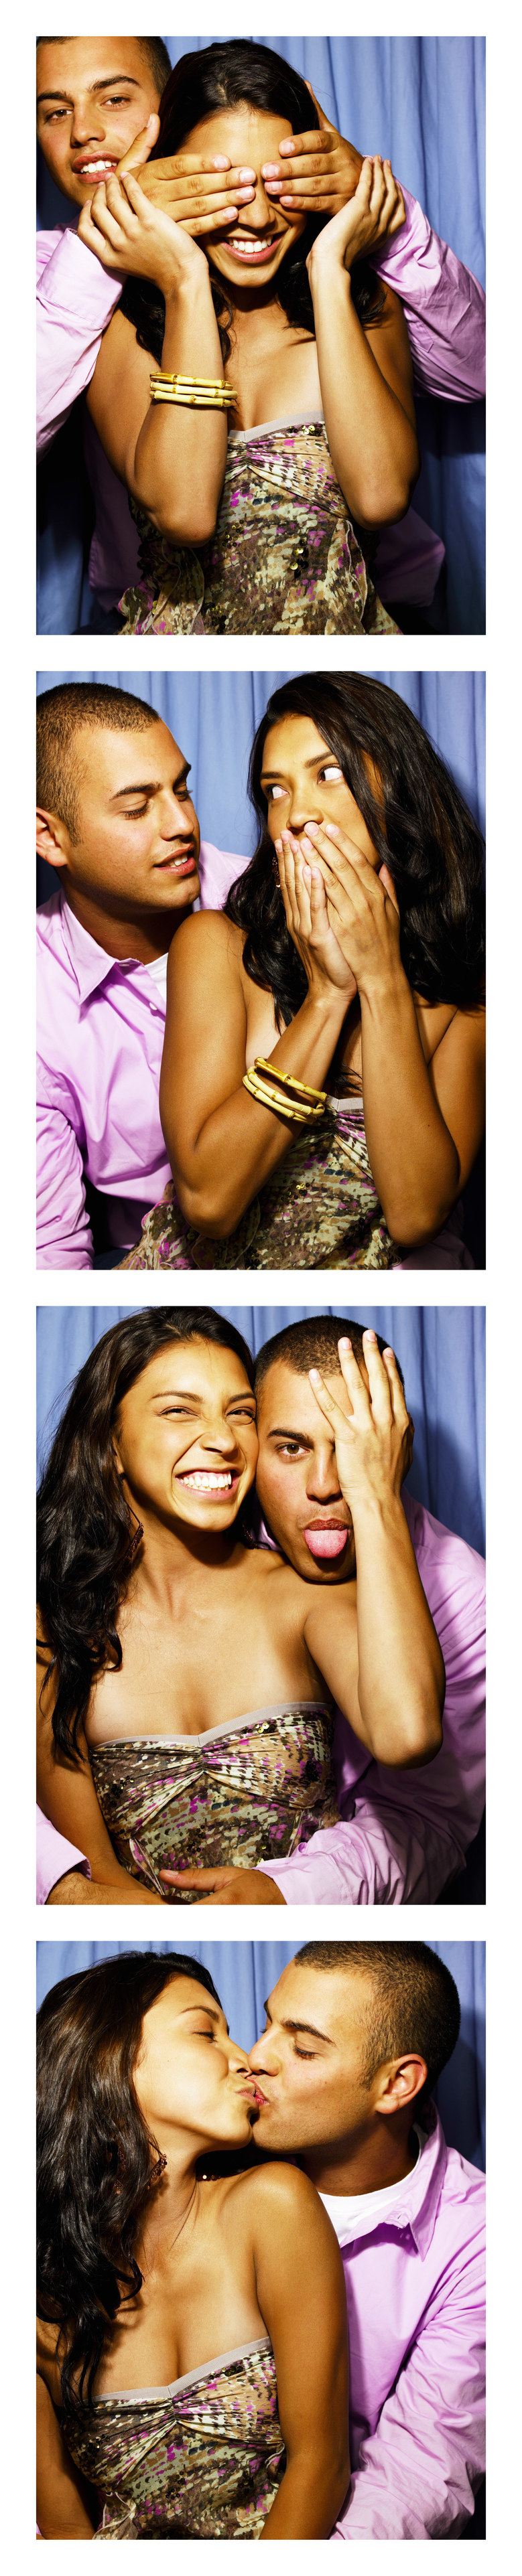 photobooth strip of a couple